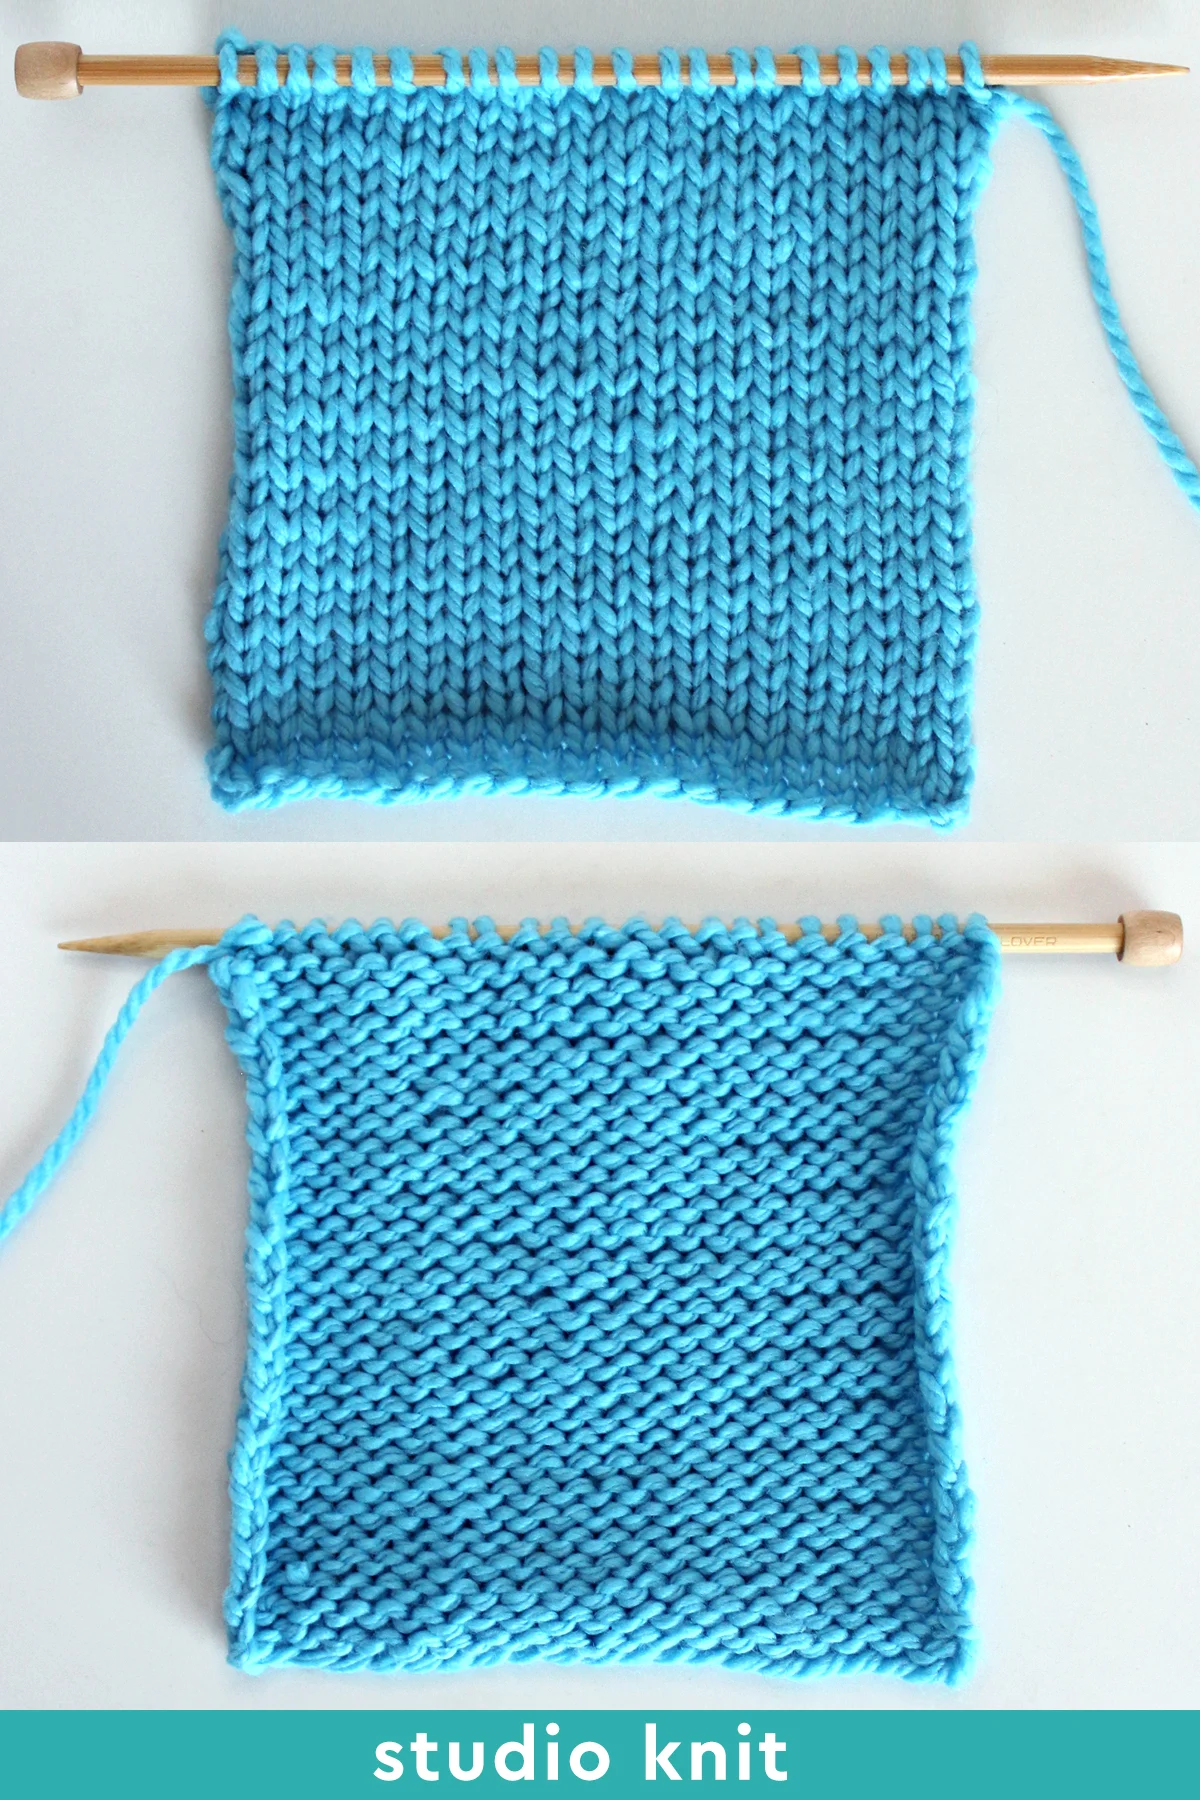 Right and Wrong sides of the Stockinette Stitch texture on knitting needle in blue color yarn.